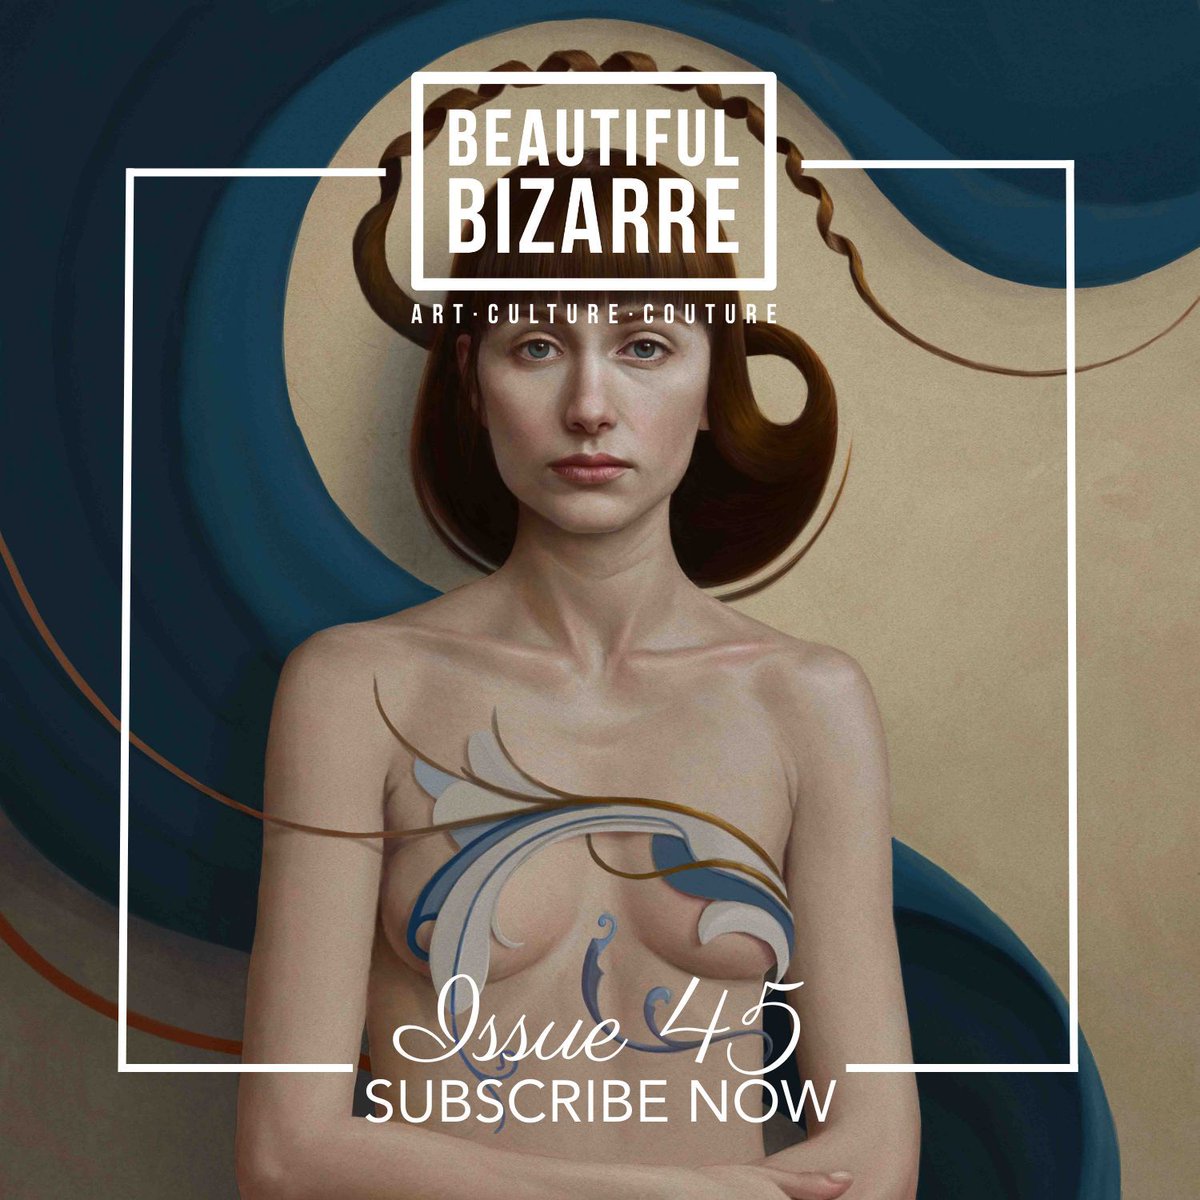 Read about Diego Fernandez and his work in the coming June issue of Beautiful Bizarre art magazine!

Never miss an issue again. Subscribe today > store.beautifulbizarre.net/product/12-mon…

#beautifulbizarre #artmagazine #artist #newcontemporaryart #artinspiration #digitalart #digitalpainting